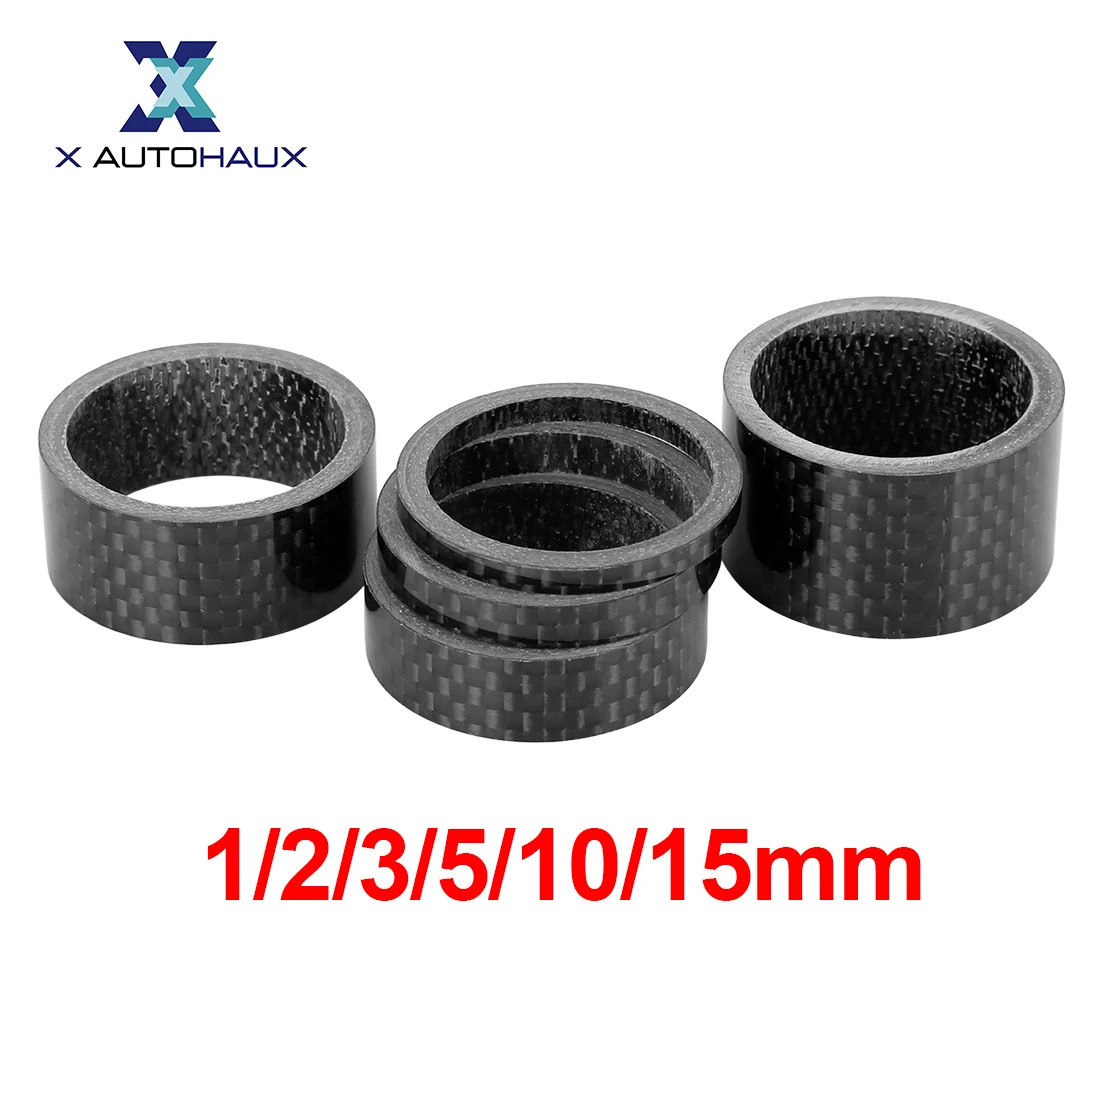 X Autohaux 5pcs/lot Carbon Fiber Bicycle Headset Spacer Fit 1 1/8 Inch 28.6mm Stem Spacer for MTB Road Bike 1/2/3/5/10/15mm